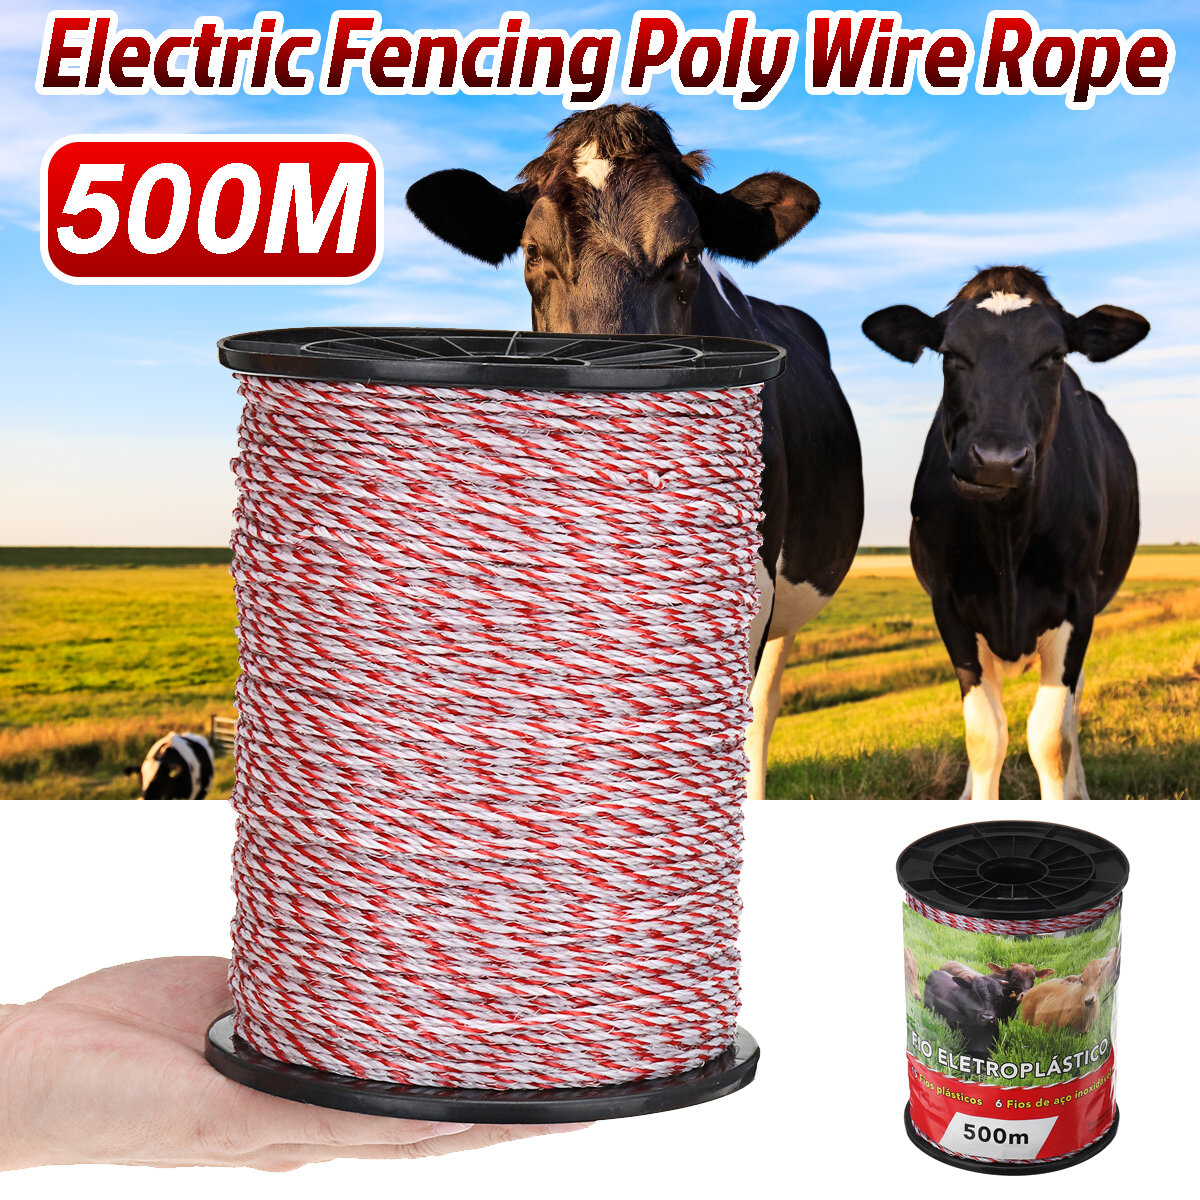 Image of 500M Roll Electric Fence Rope Red White Polywire with Steel Poly Rope for Horse Animal Fencing Ultra Low Resistance Wire